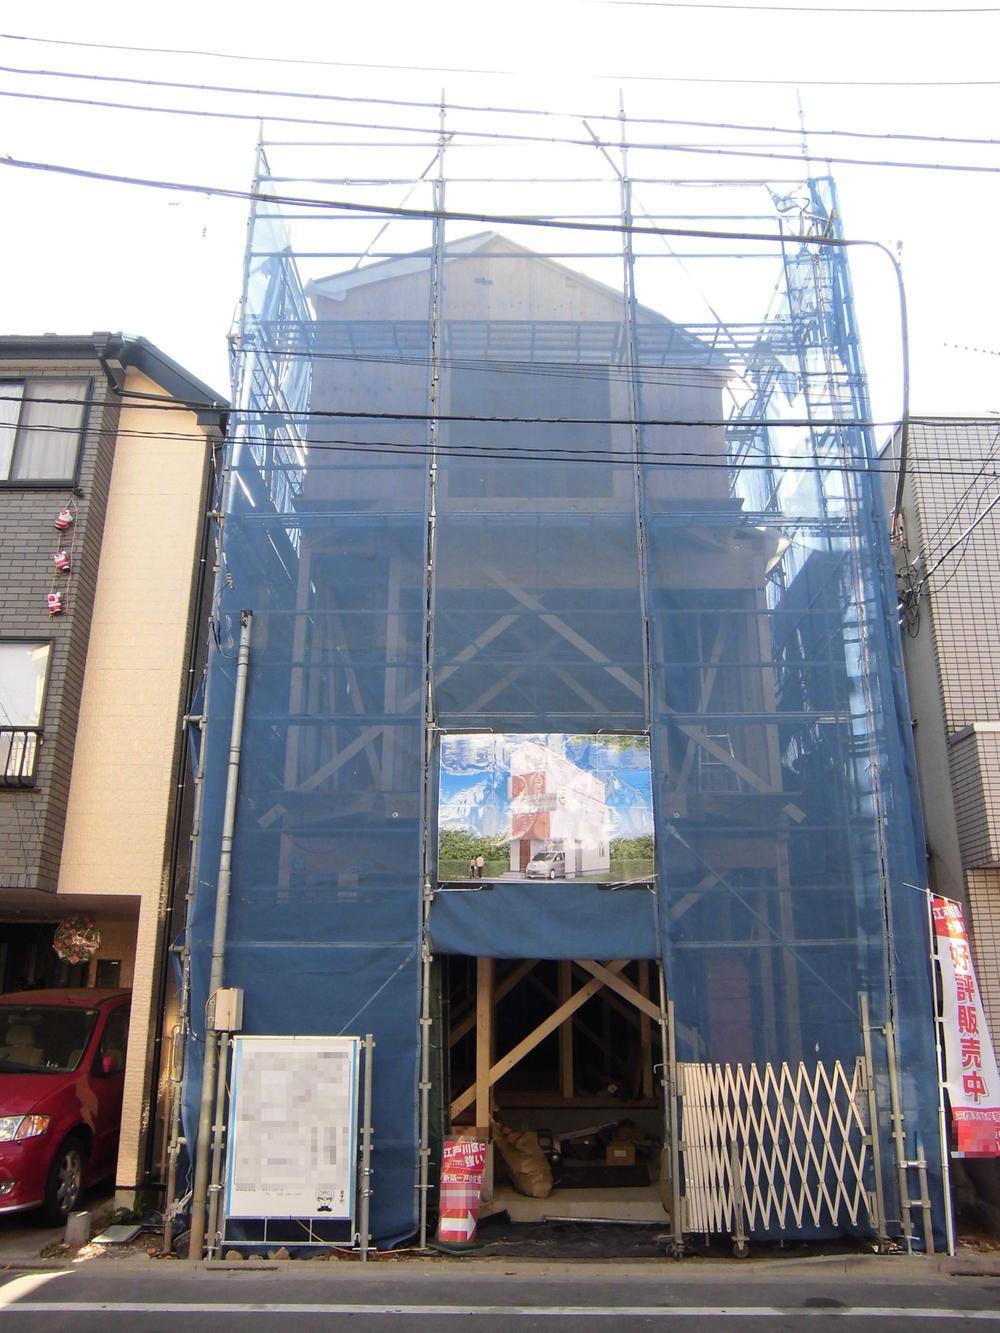 Local appearance photo. It is currently under construction